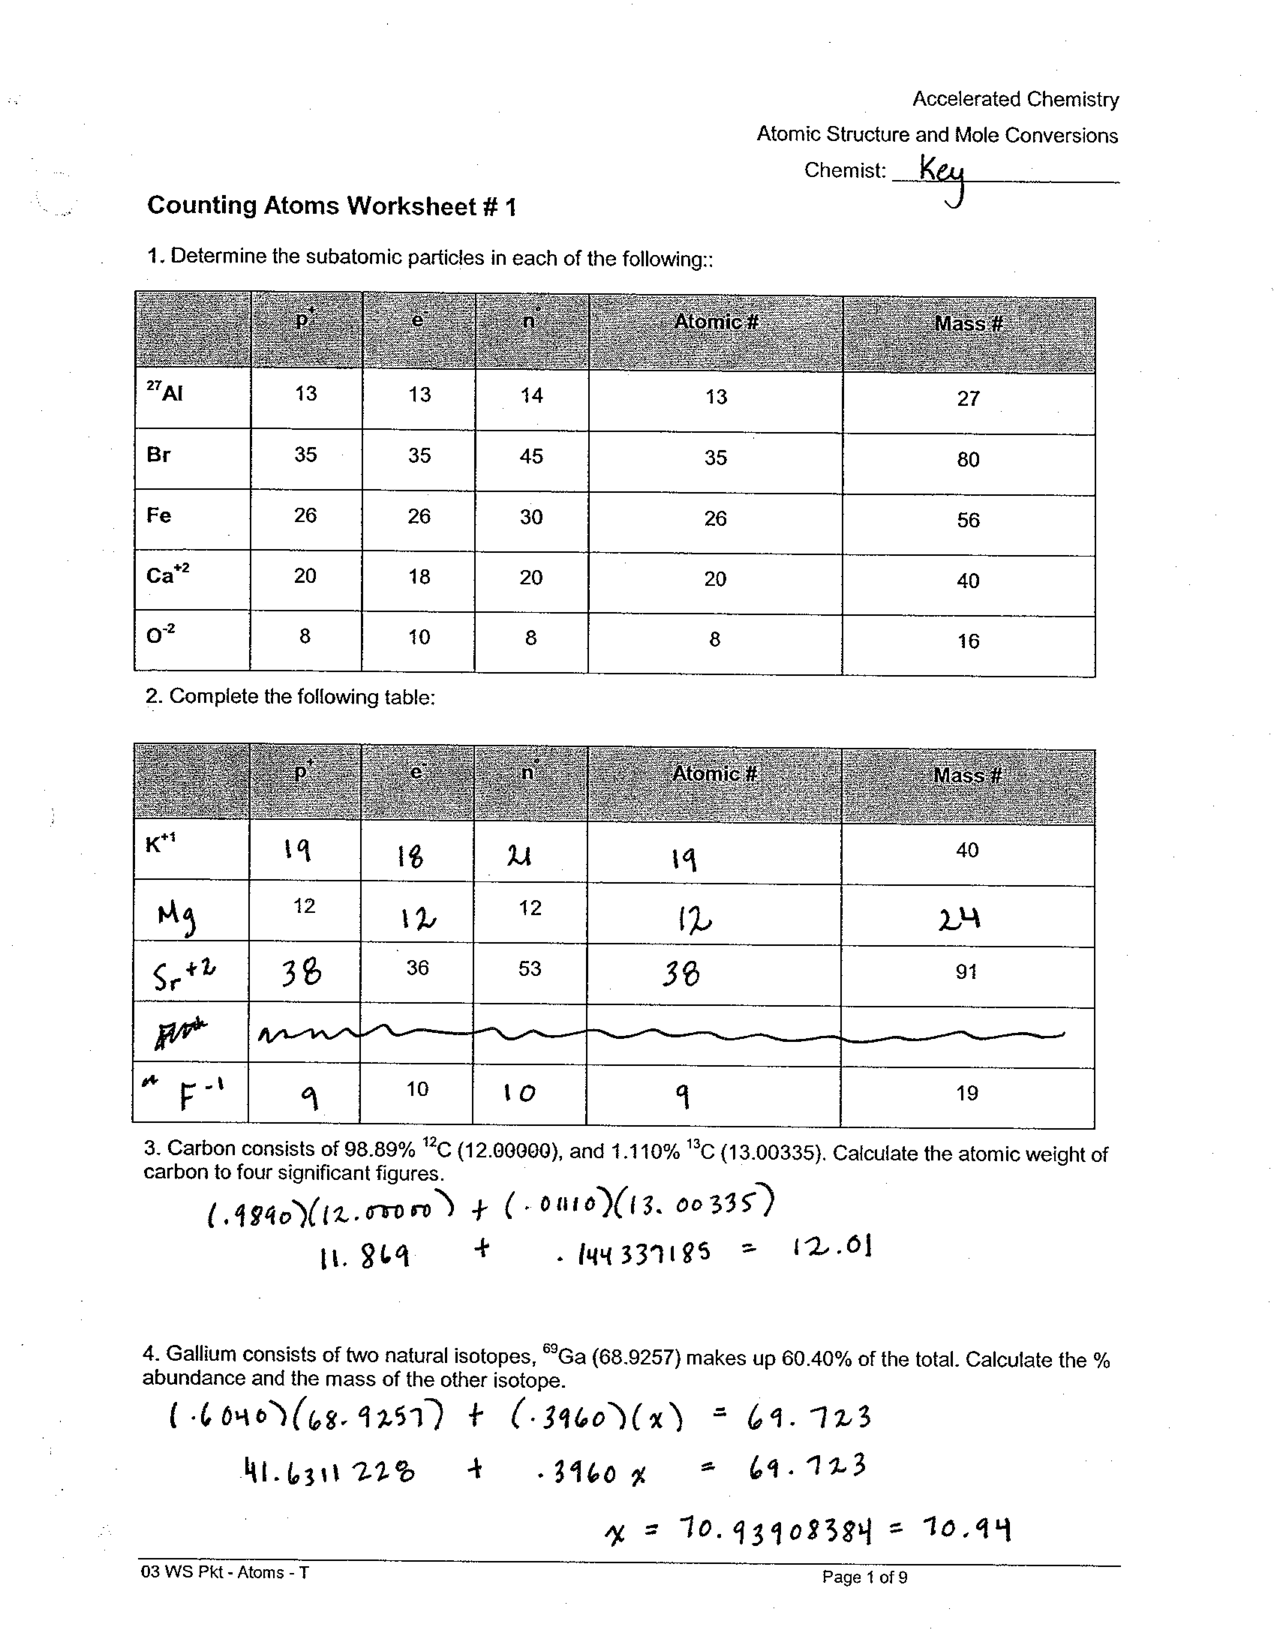 Middle School Counting Atoms Worksheet Answer Key